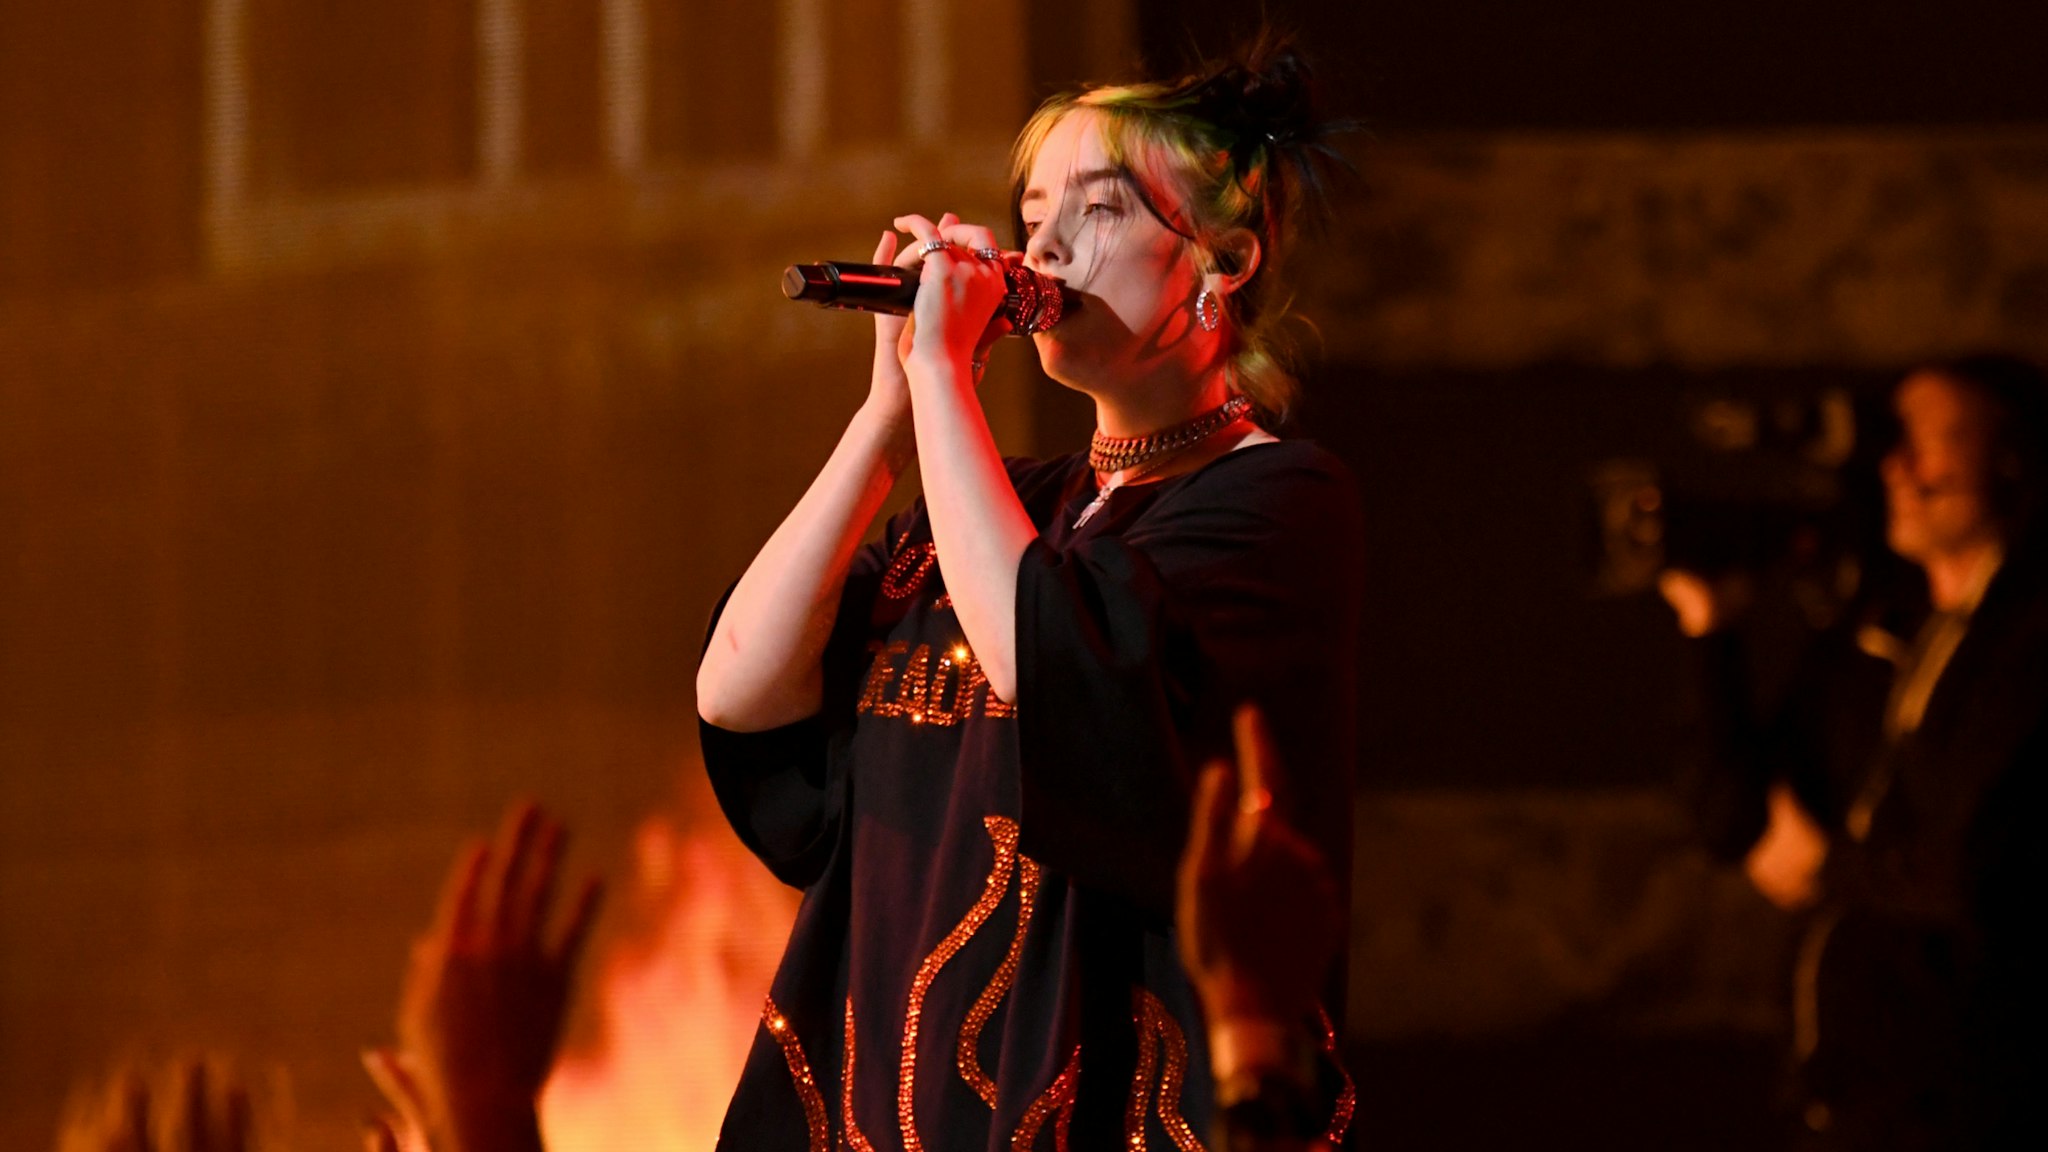 Billie Eilish performs onstage during the 2019 American Music Awards at Microsoft Theater on November 24, 2019 in Los Angeles, California.